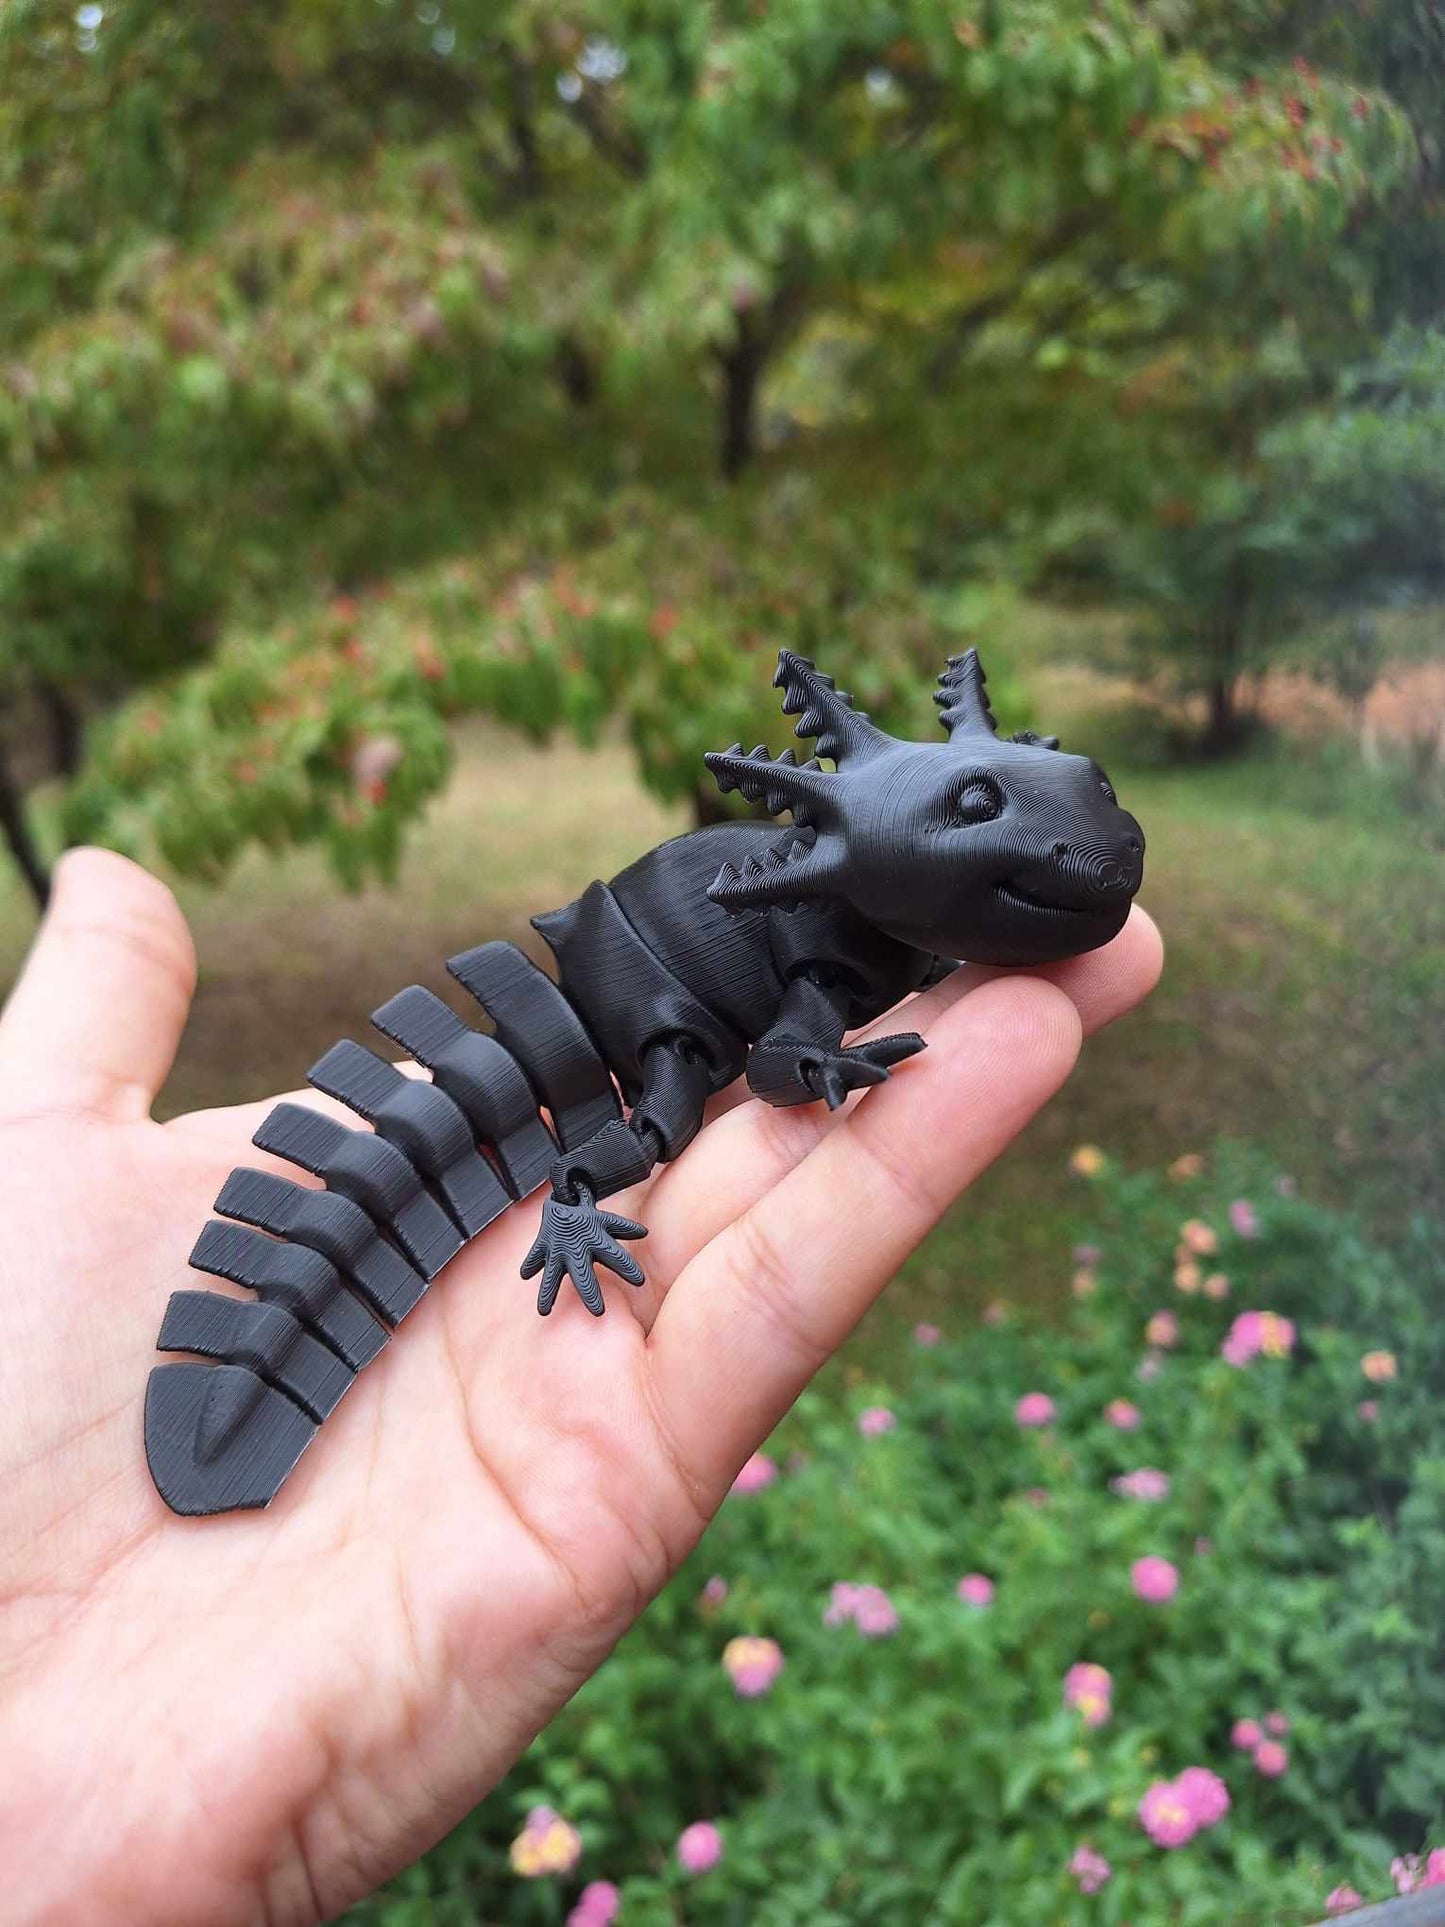 A hand presents an articulated axolotl figure printed in Creality Hyper Black PLA filament, offering a sleek, matte finish. The figure is designed for sensory engagement, with segments that provide a satisfying fidget experience. Positioned against a garden with blurred foliage and flowers, the piece serves as a tactile object for sensory exploration and stress relief.